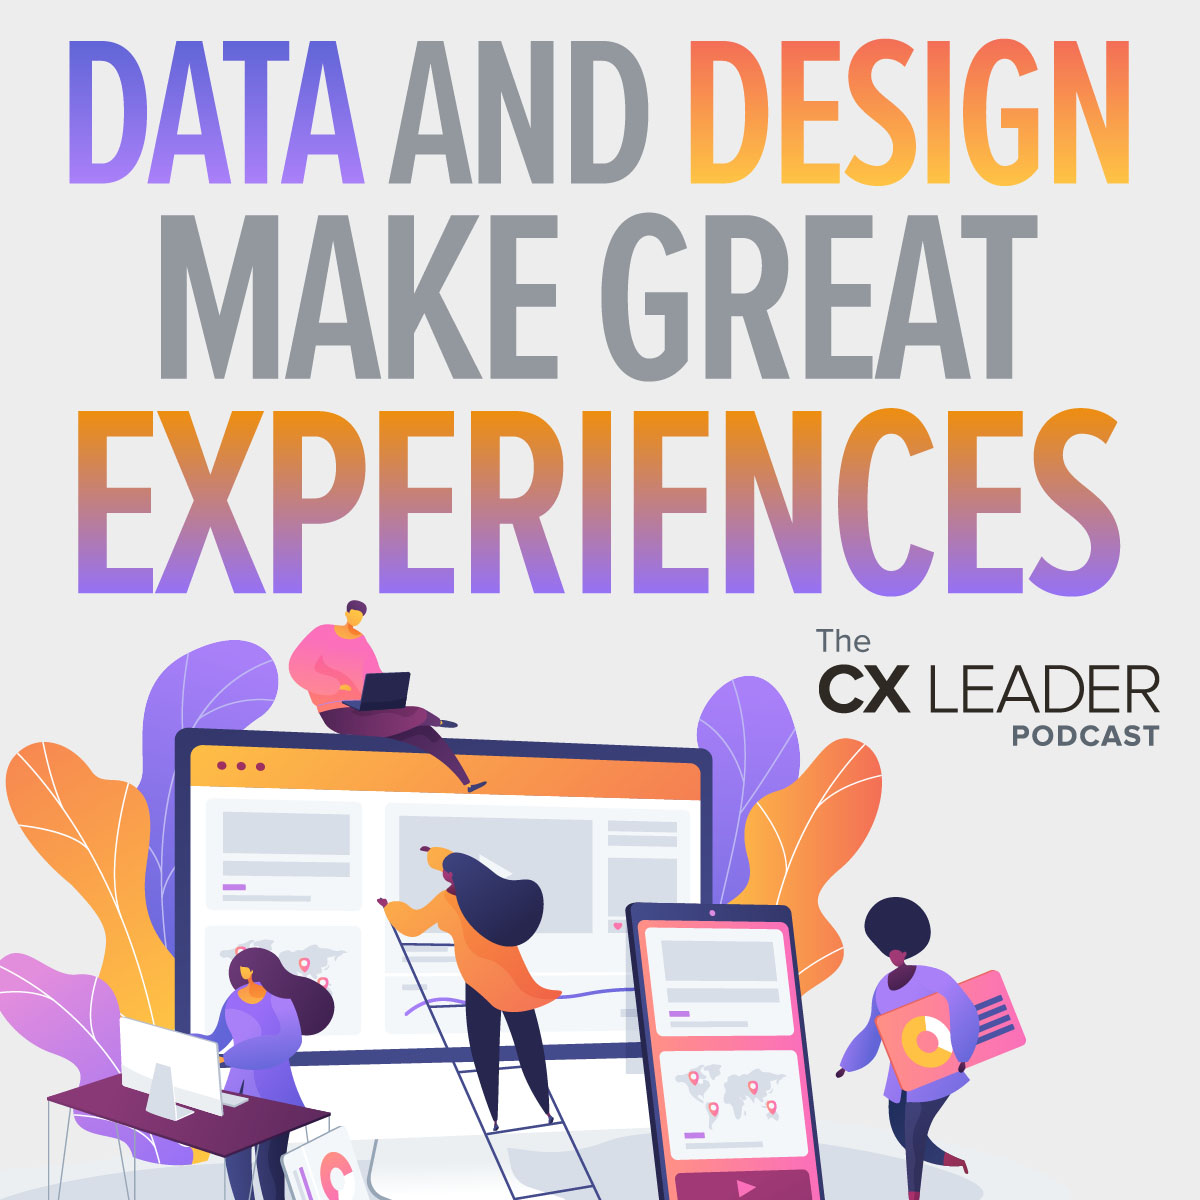 Data and Design Make Great Experiences